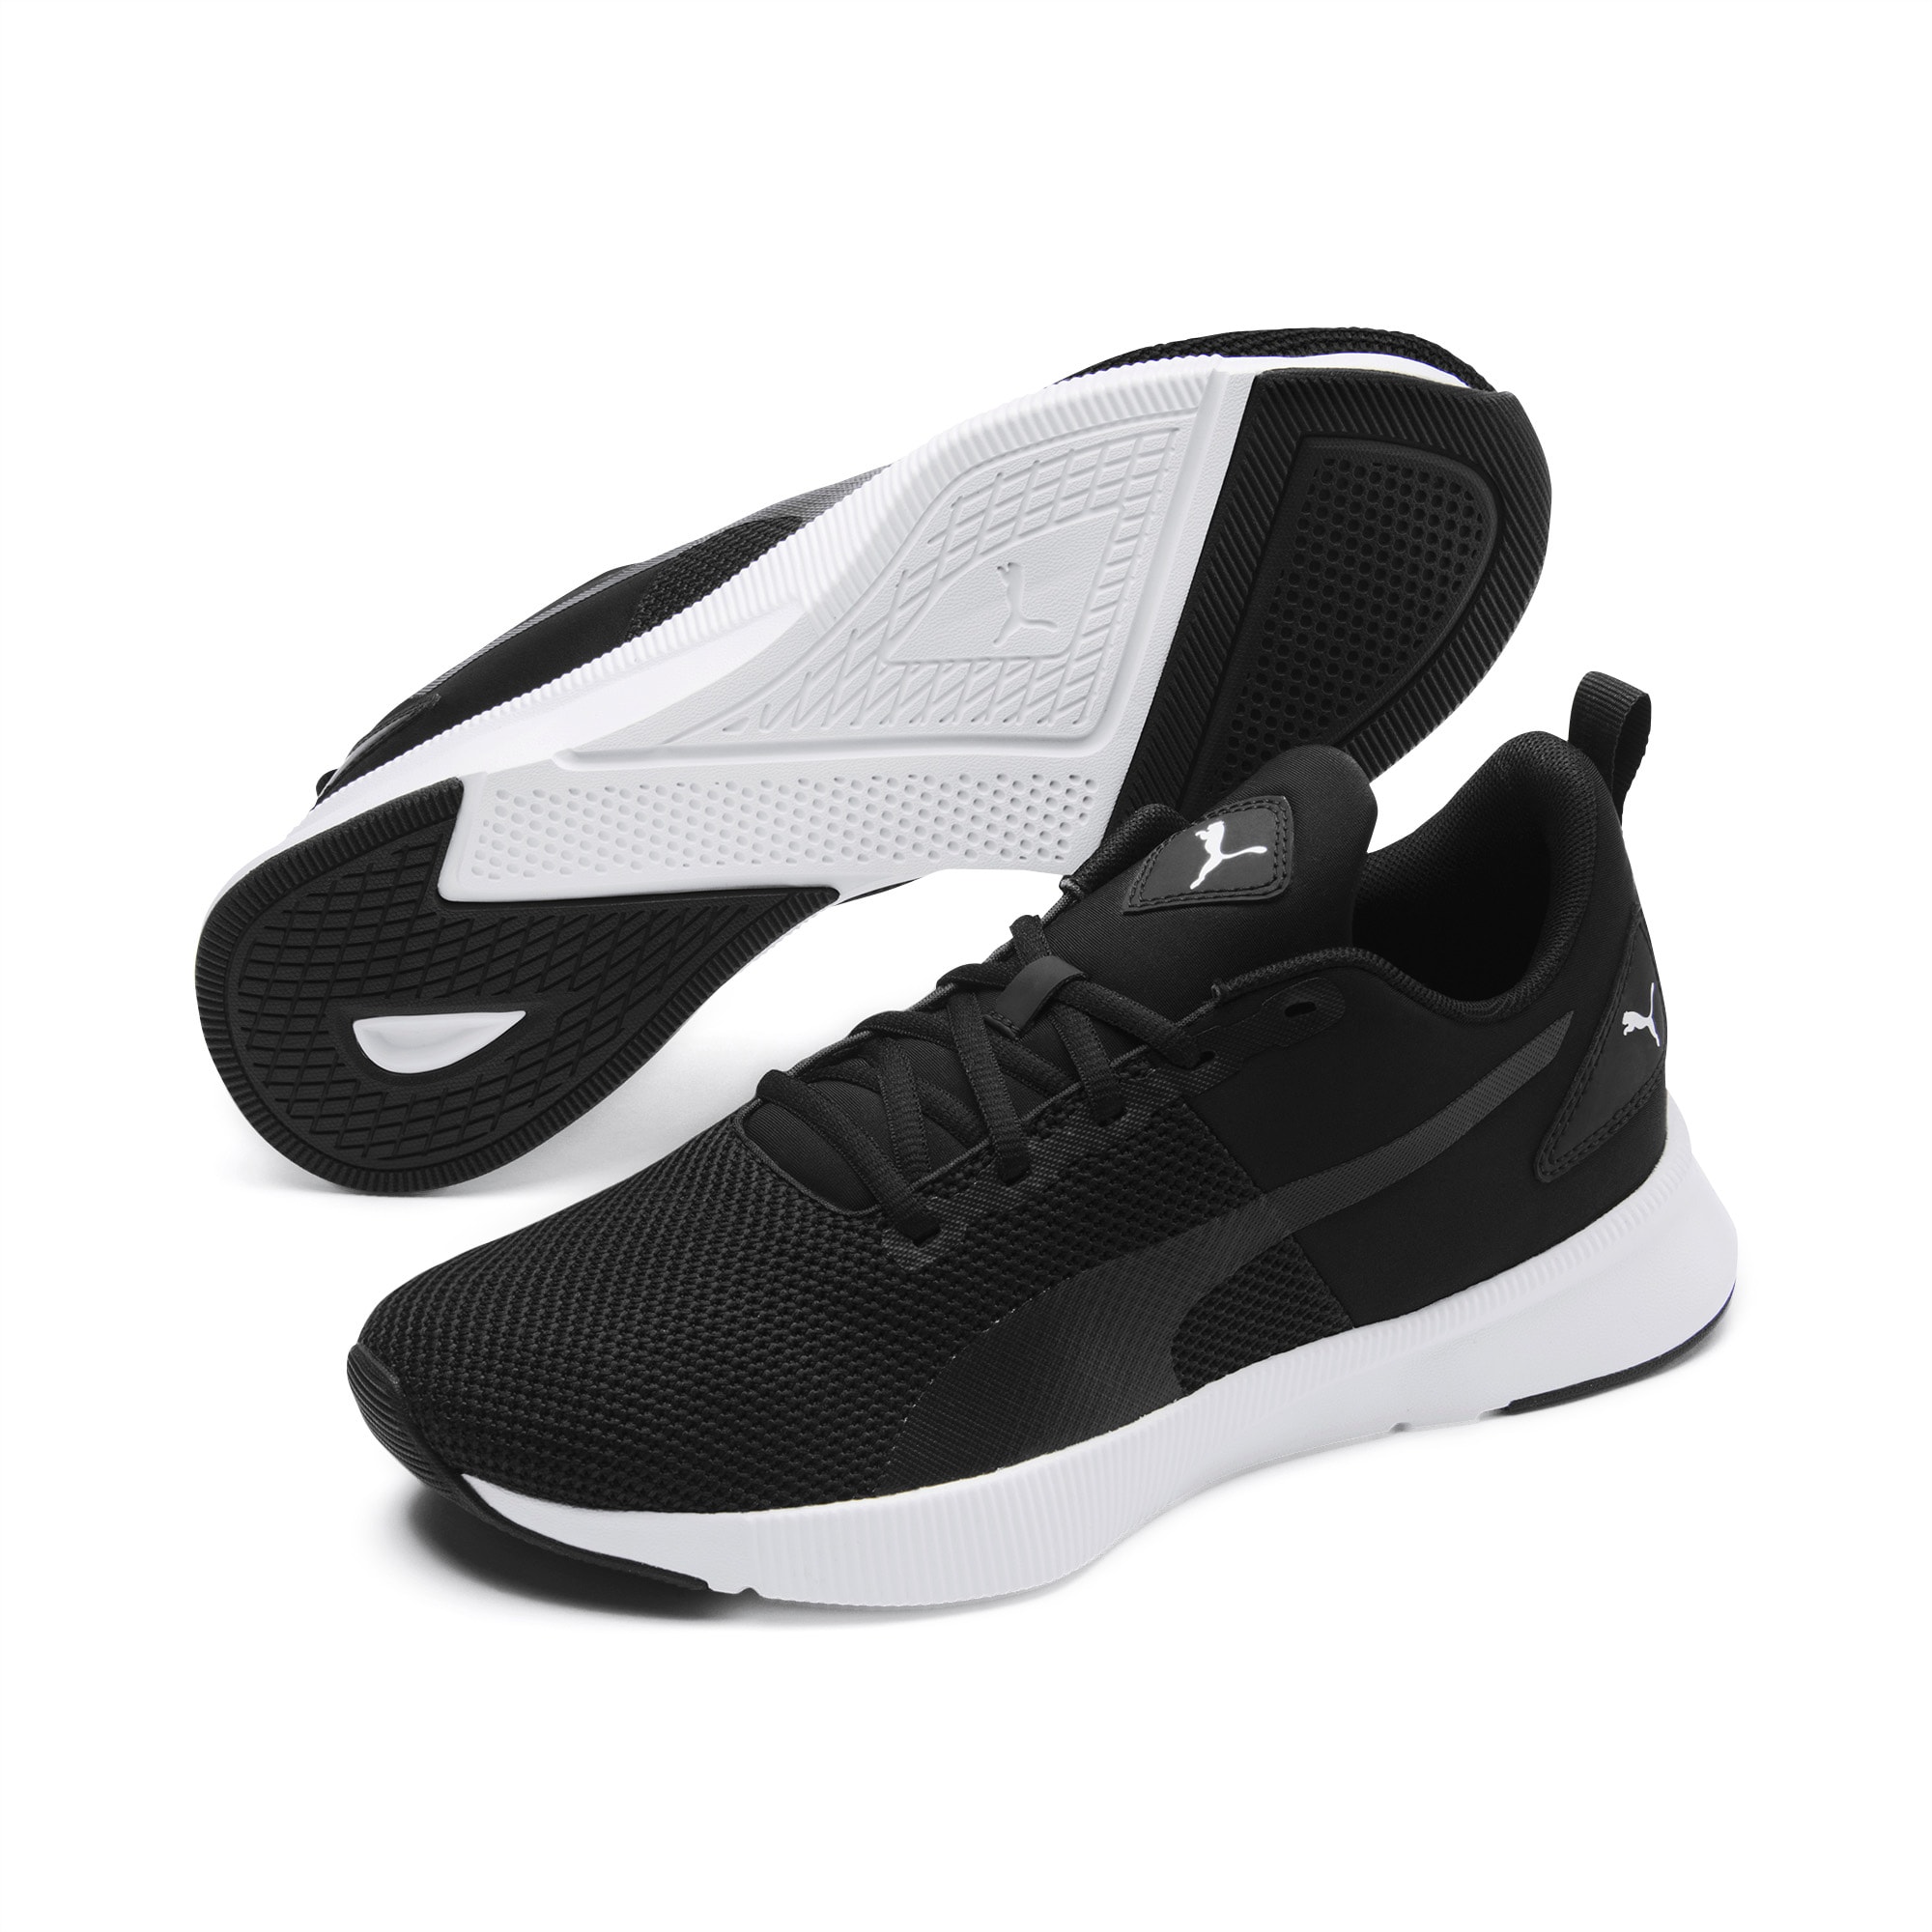 puma running shoes black and white